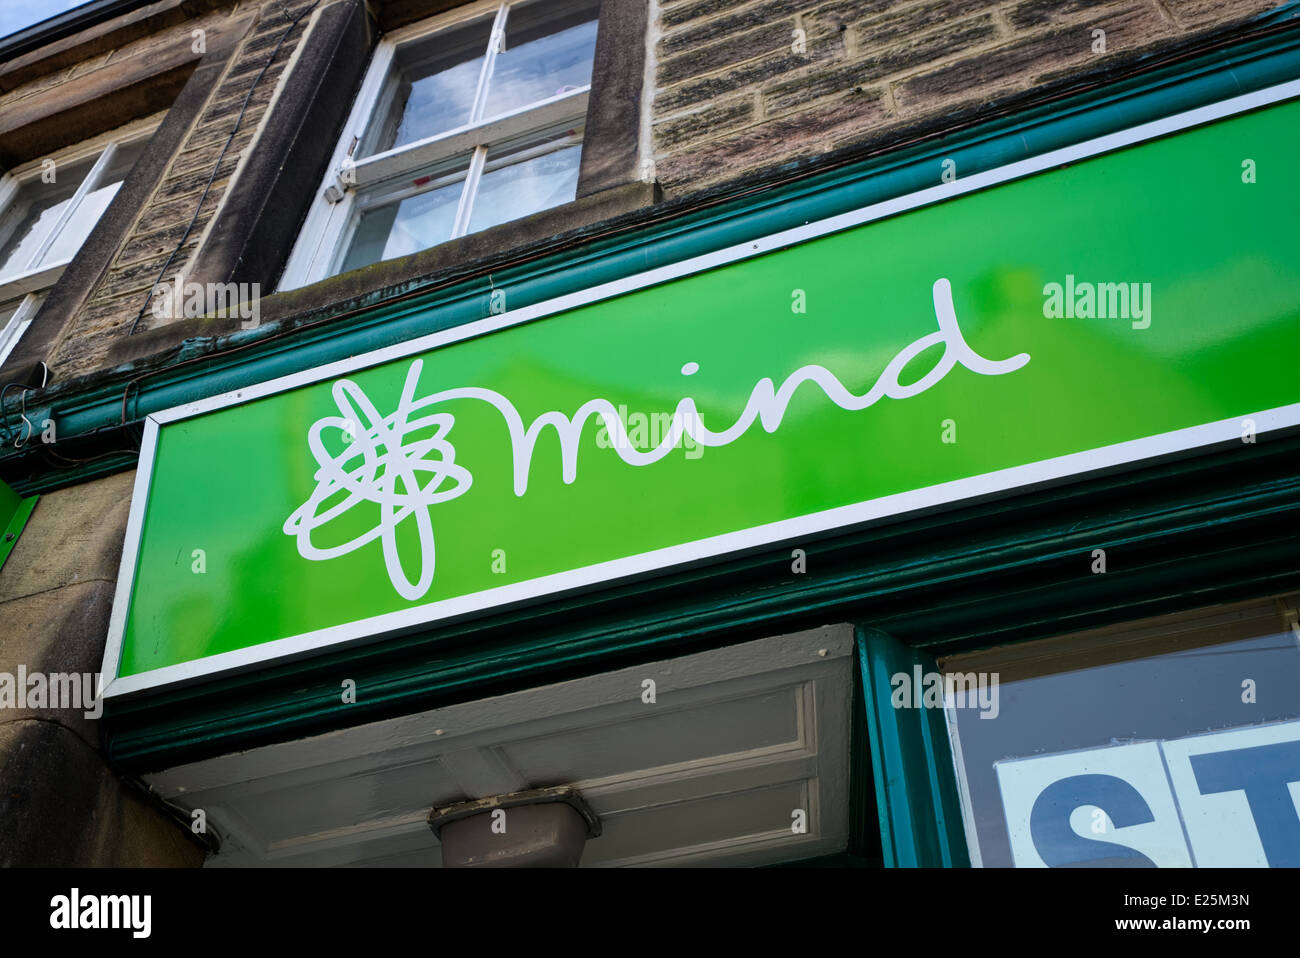 Mind charity shop sign in Derbyshire England Stock Photo